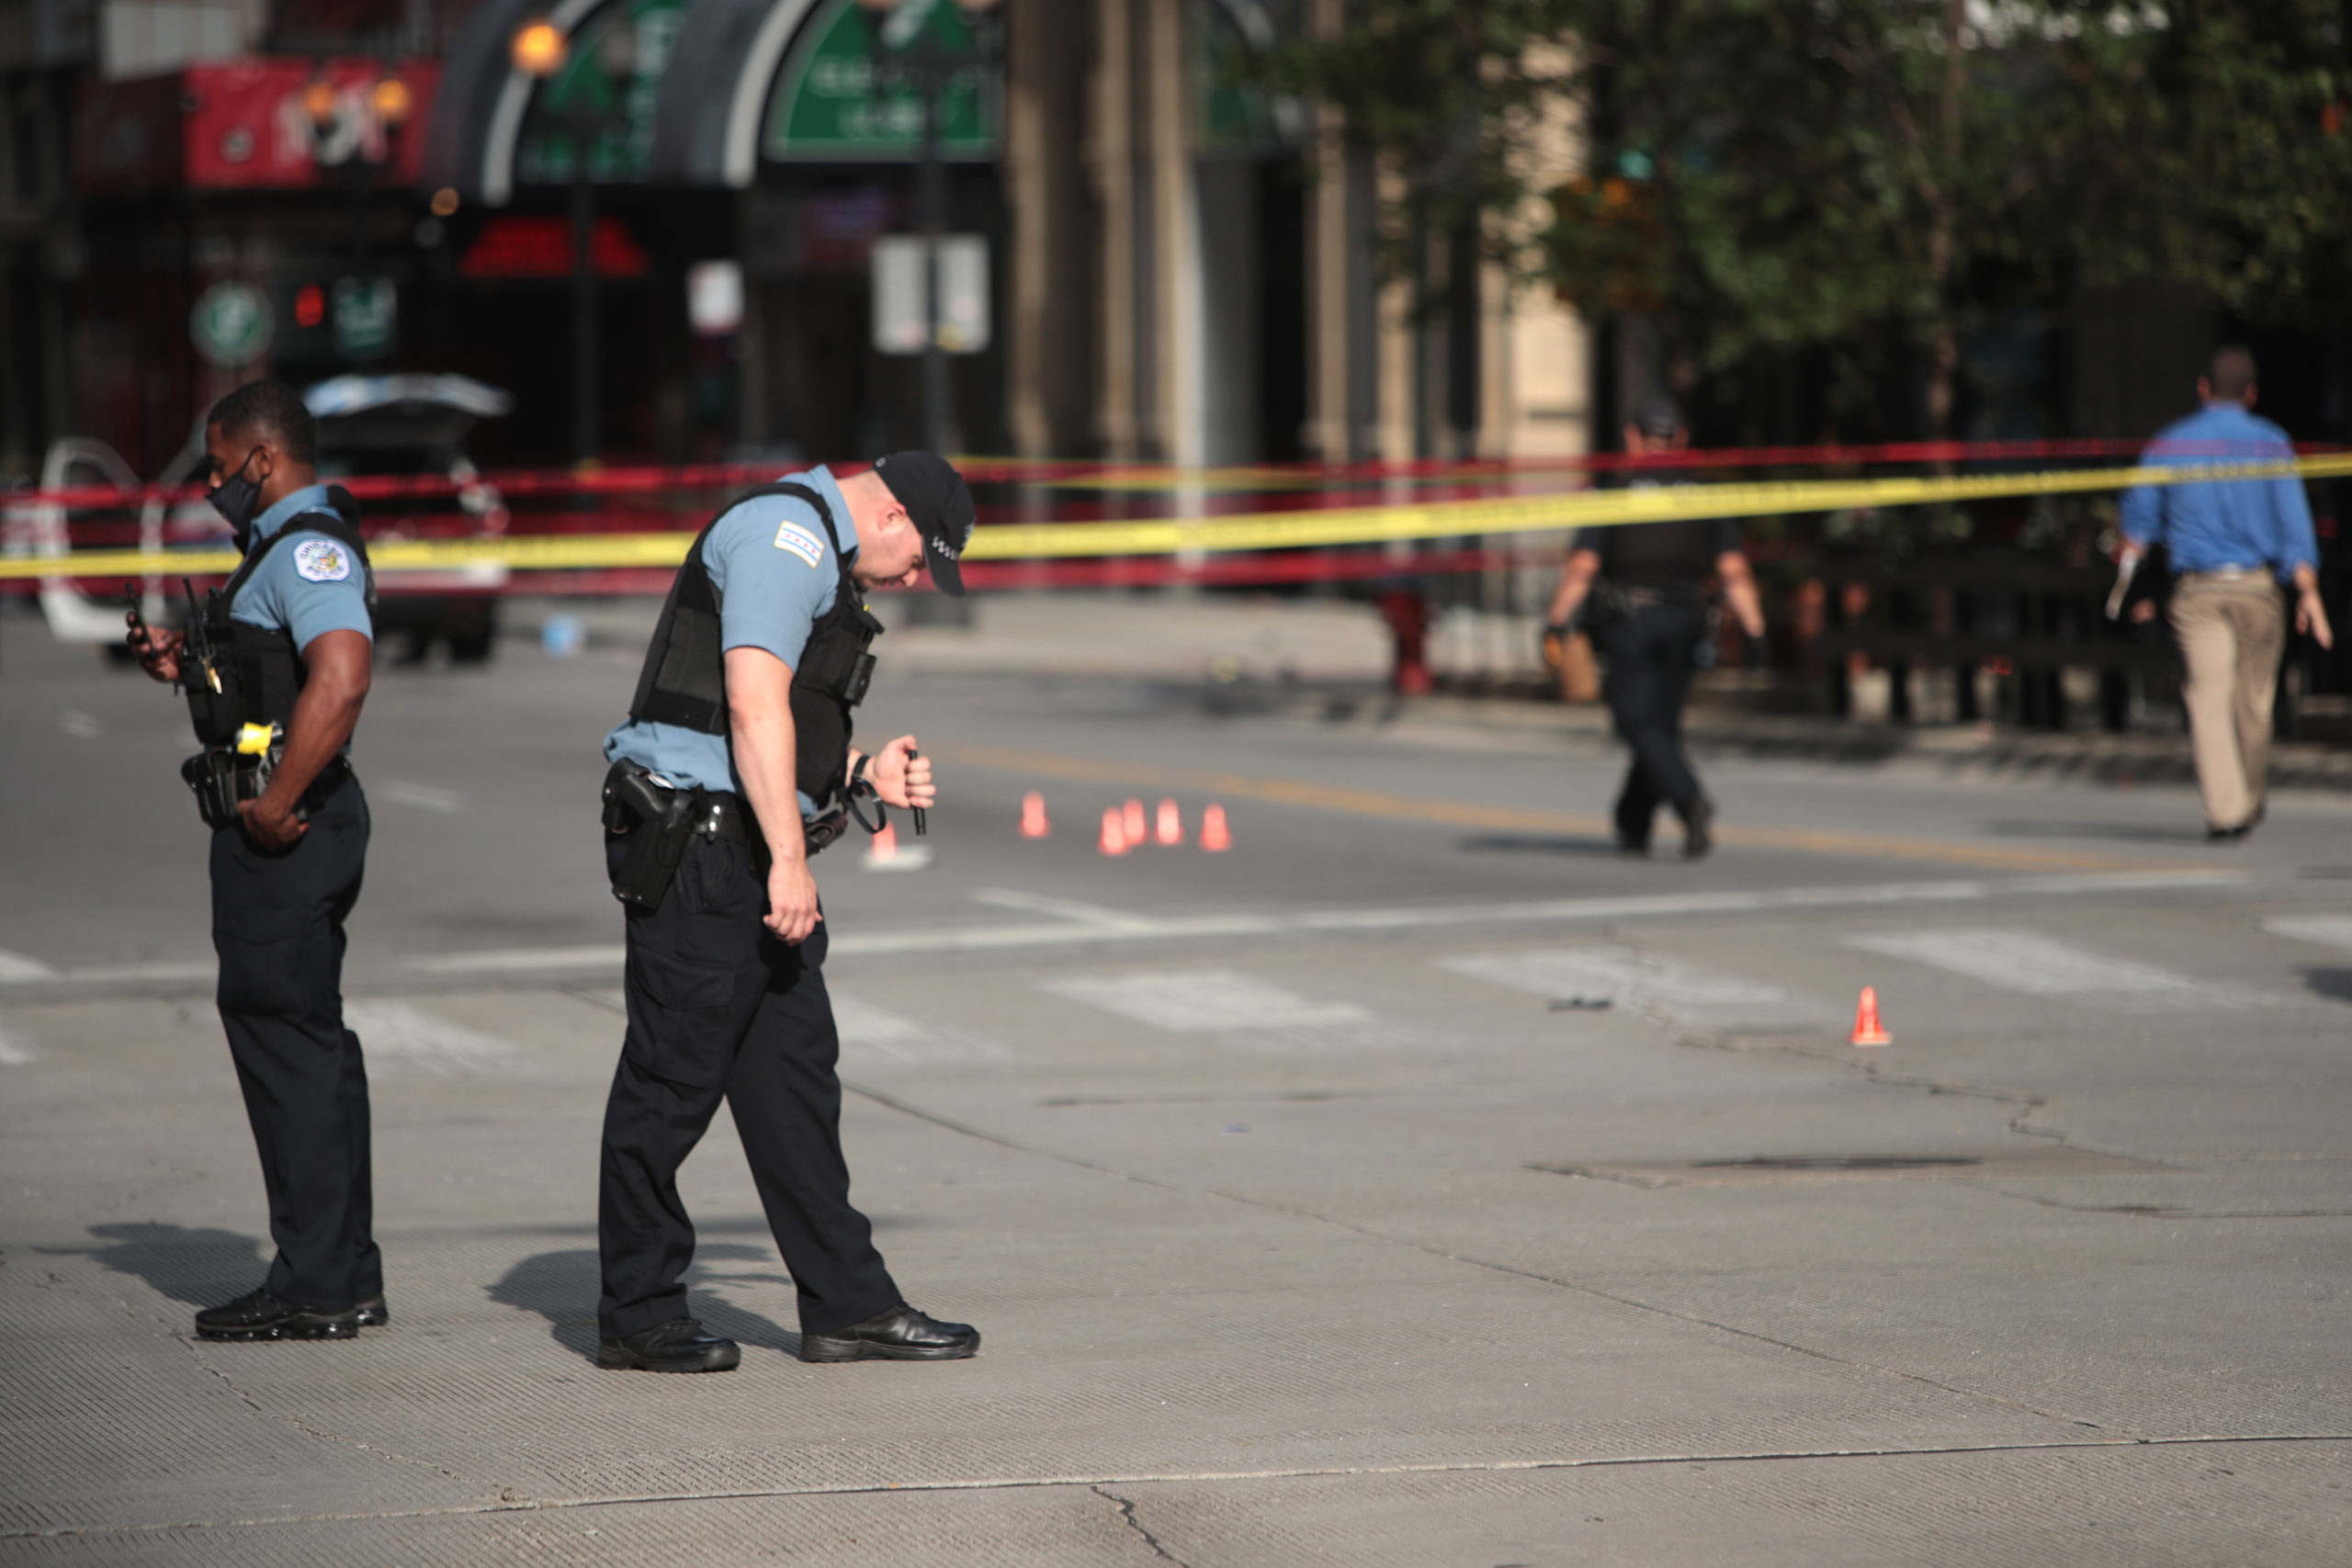 CHICAGO, ILLINOIS - AUGUST 10: Police investigate where a shooting took place on Michigan Ave. hours after the city suffered from widespread looting and vandalism, on August 10, 2020 in Chicago, Illinois. Police made several arrests during the night of unrest and recovered at least one firearm. (Scott Olson/Getty Images)